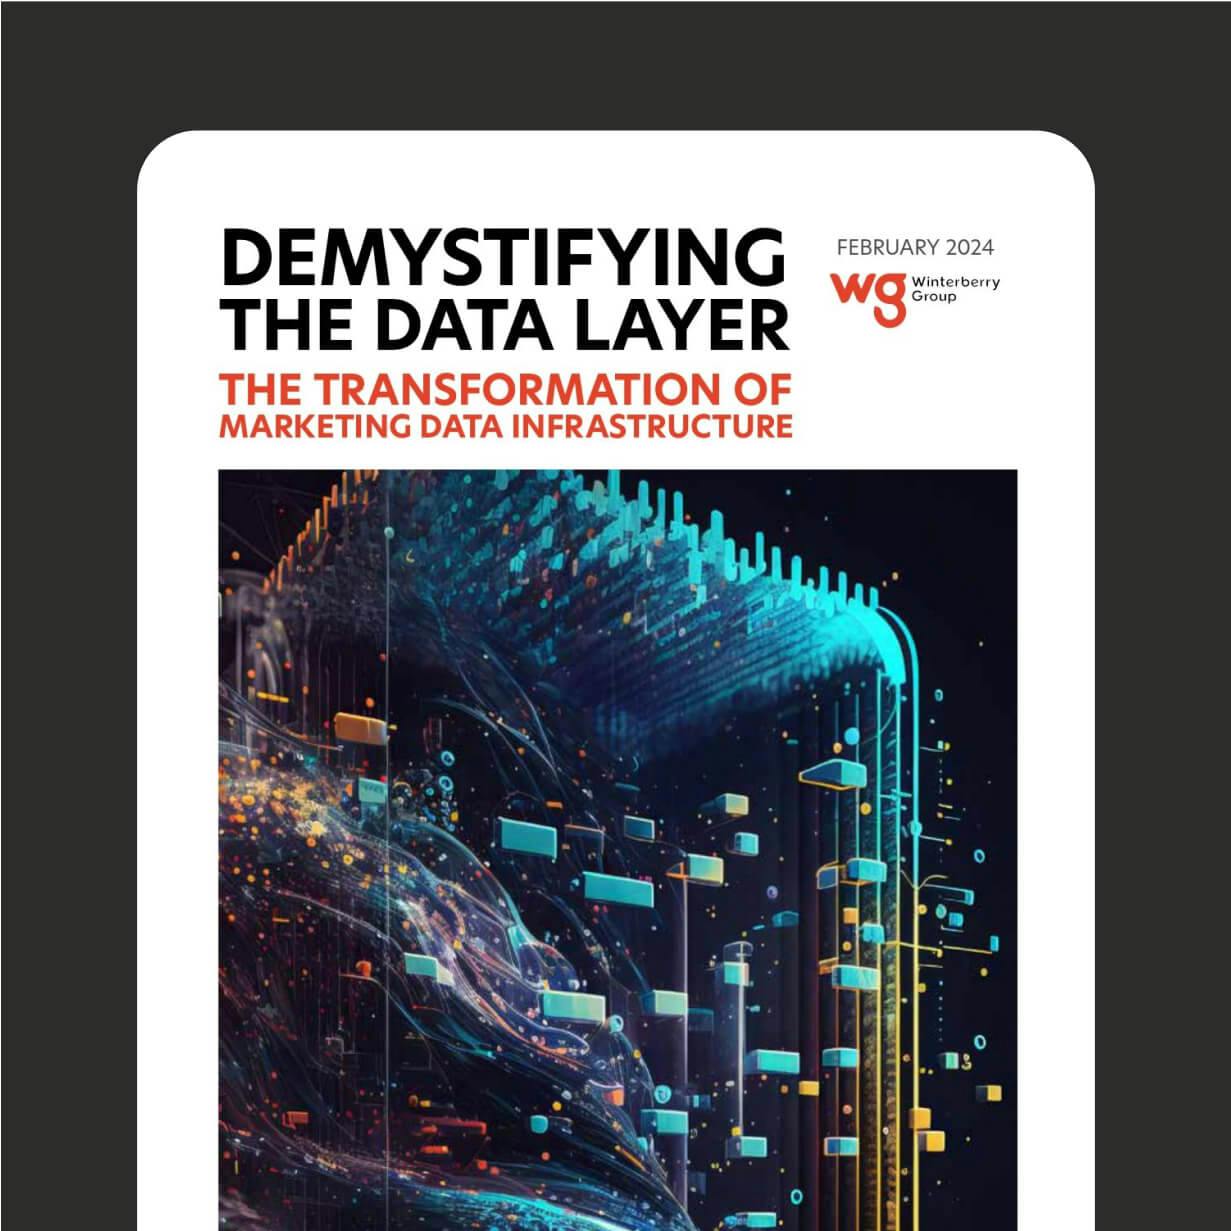 Demystifying the Data layer The Transformation of Marketing Data Infrastructure